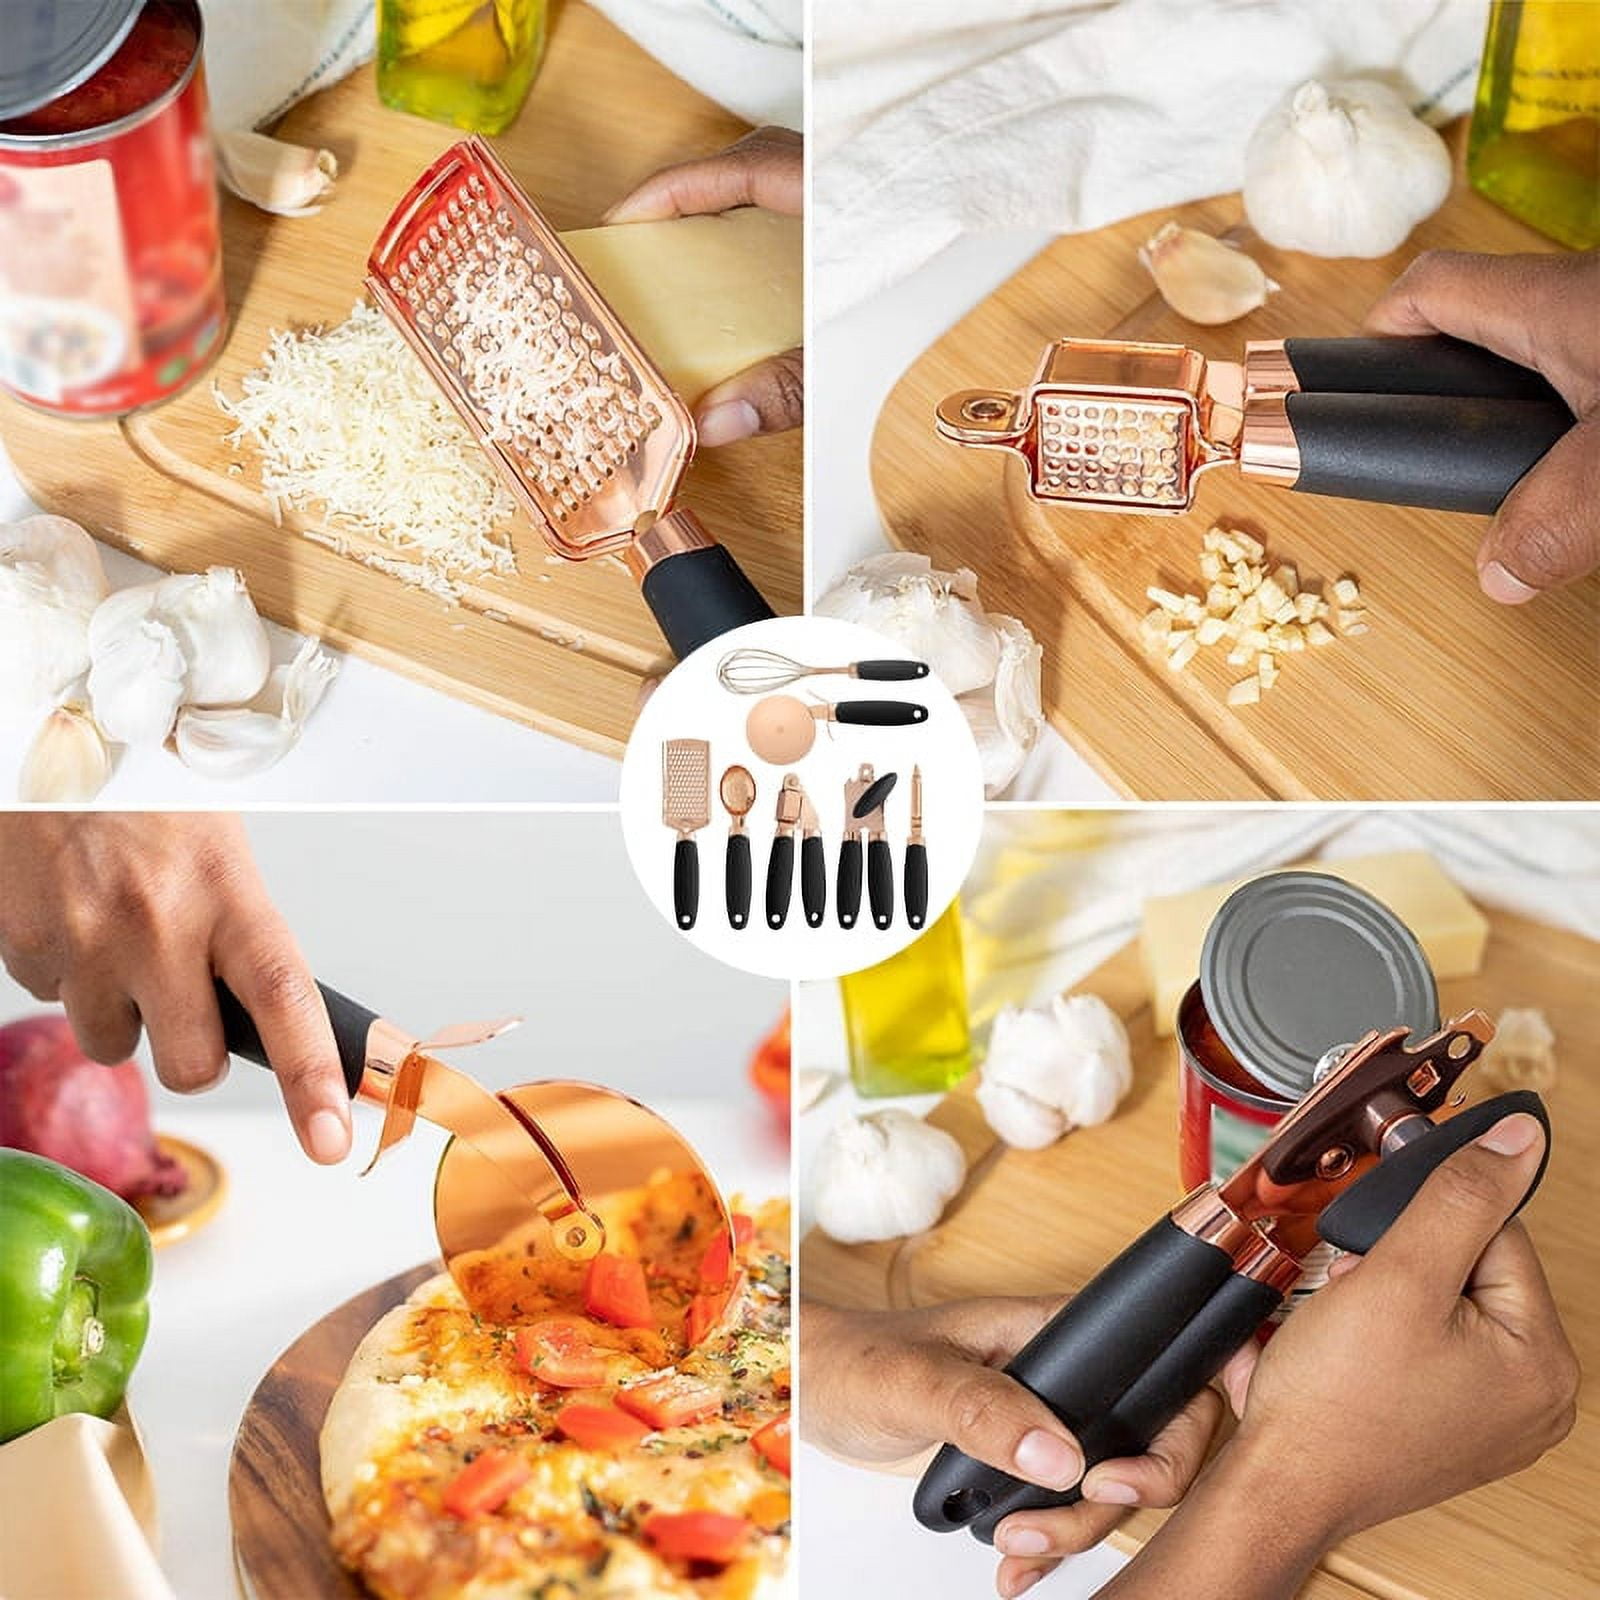 Tohuu Kitchen Gadgets Set 6 Pcs Small Kitchen Utensils Set Cheese Grater  Bottle Opener Pizza Cutter Multifunctional Kitchen Tools for Peeling  Cutting appealing 